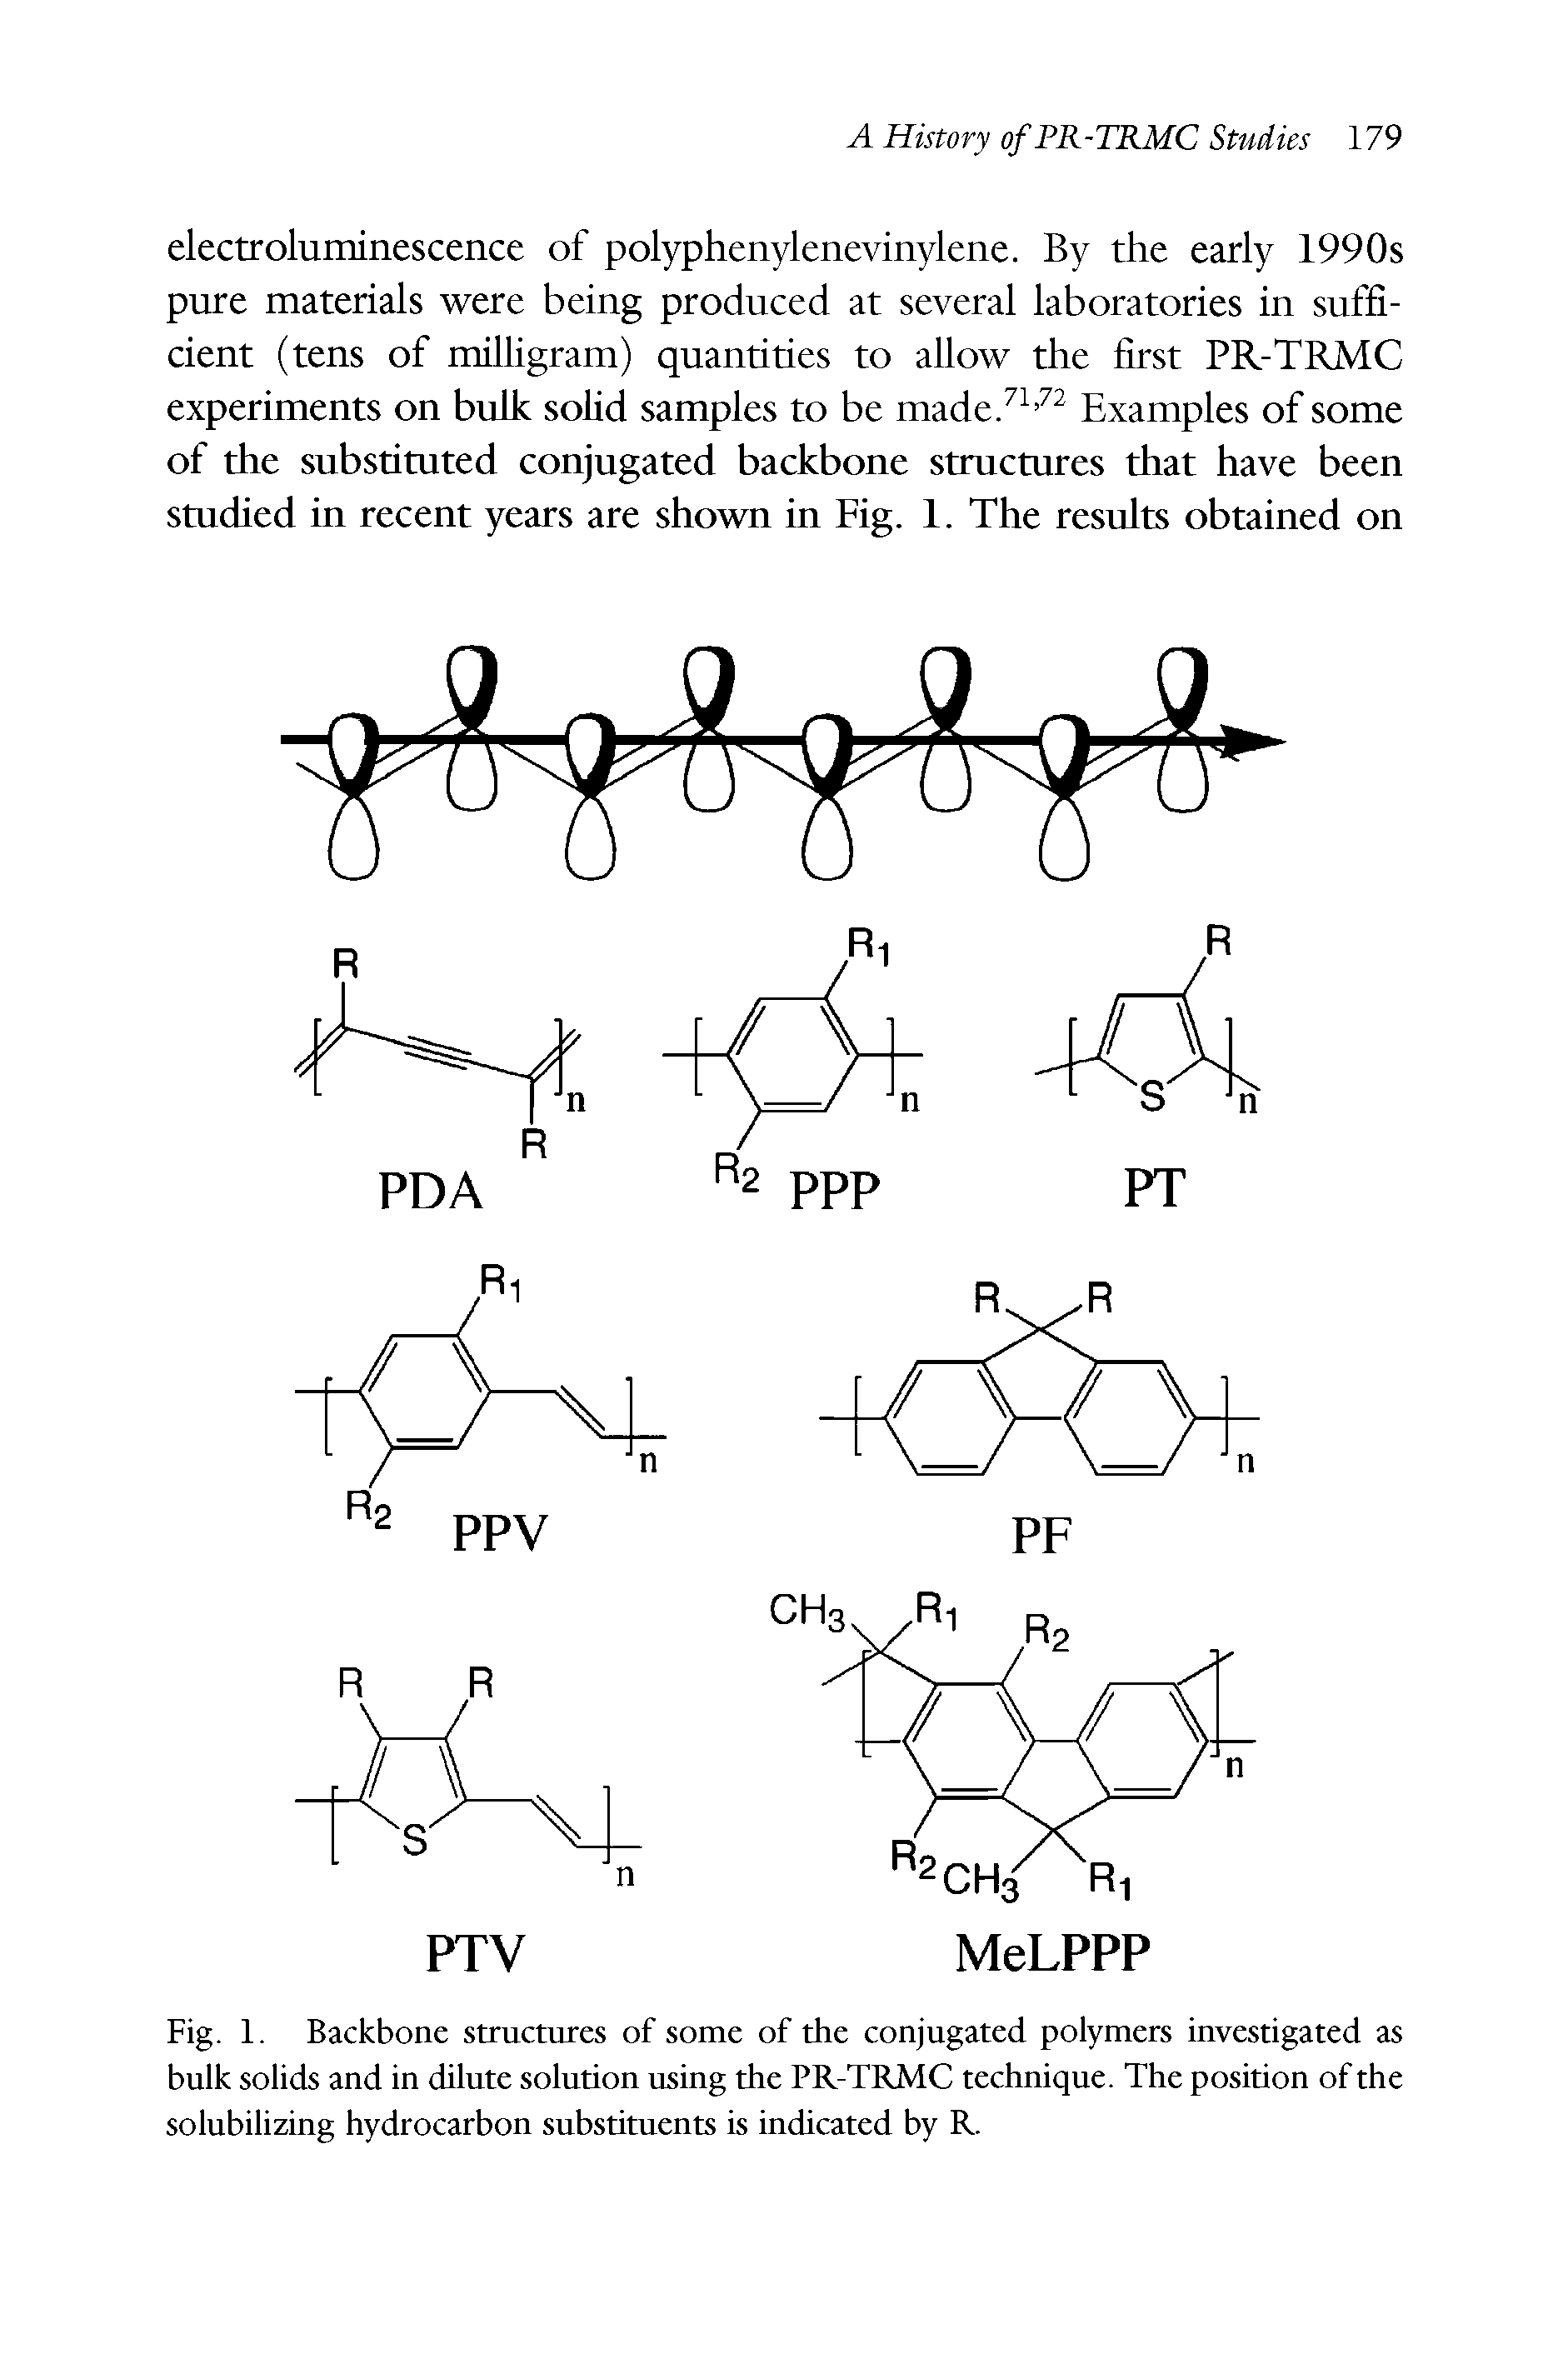 Fig. 1. Backbone structures of some of the conjugated polymers investigated as bulk solids and in dilute solution using the PR-TRMC technique. The position of the solubilizing hydrocarbon substituents is indicated by R.